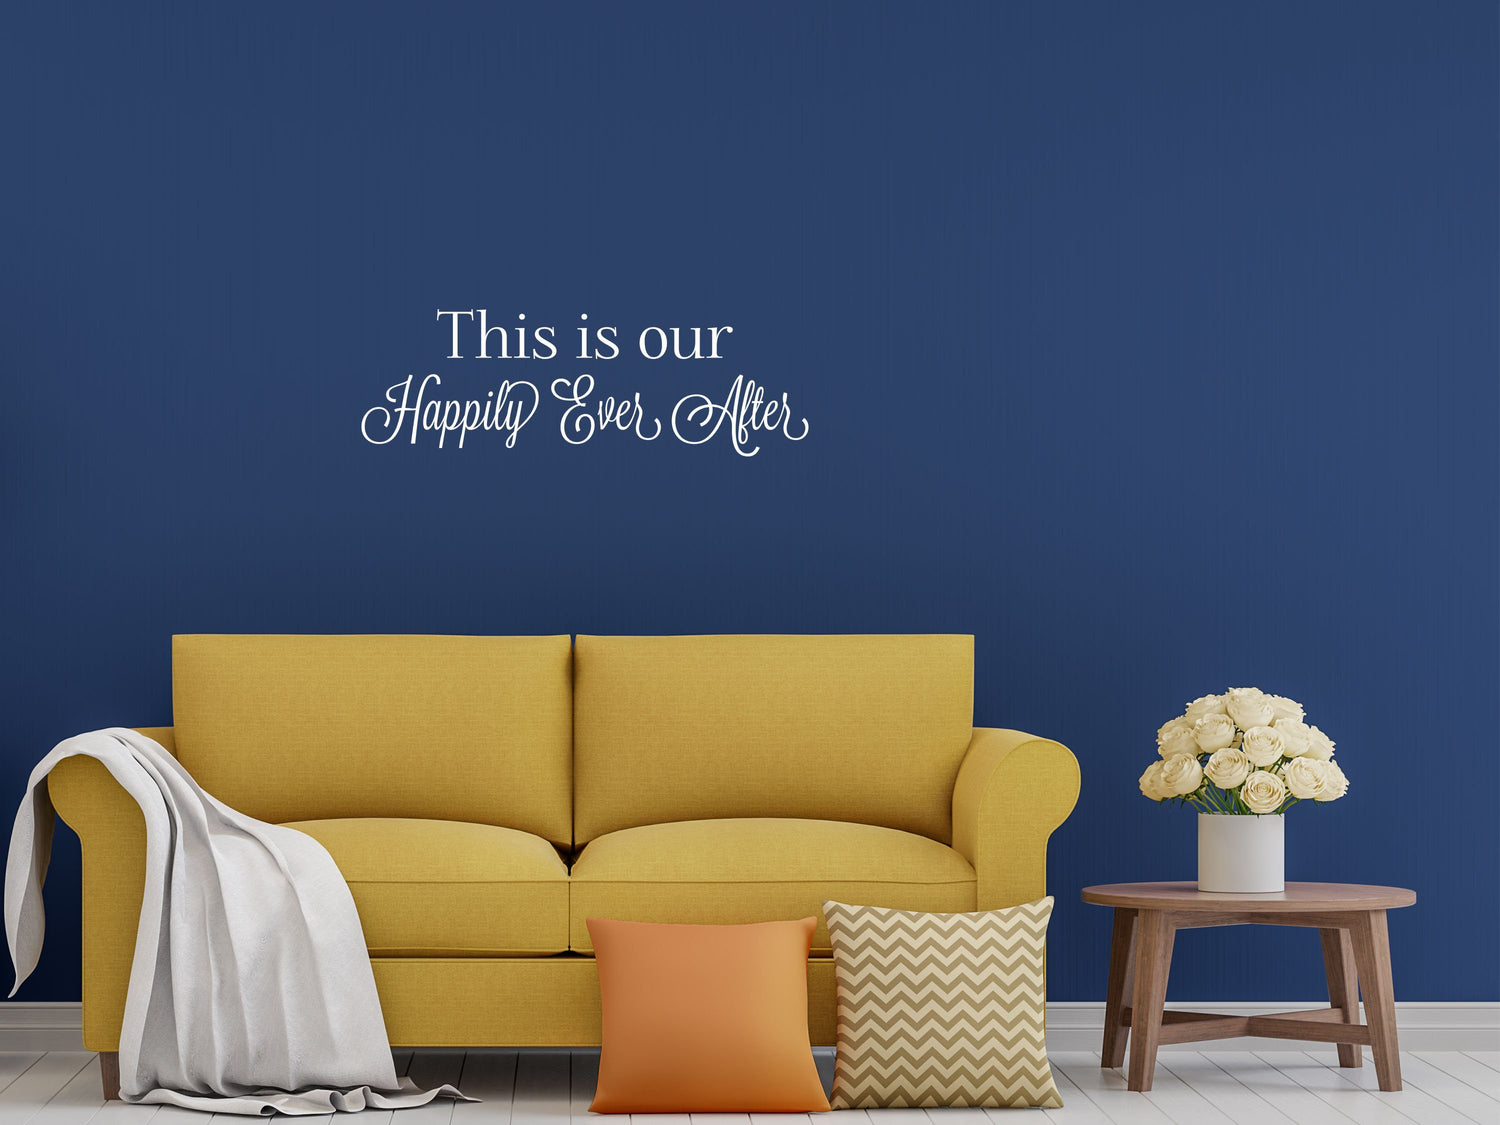 This Is Our Happily Ever After - Inspirational Wall Signs Vinyl Wall Decal Inspirational Wall Signs 